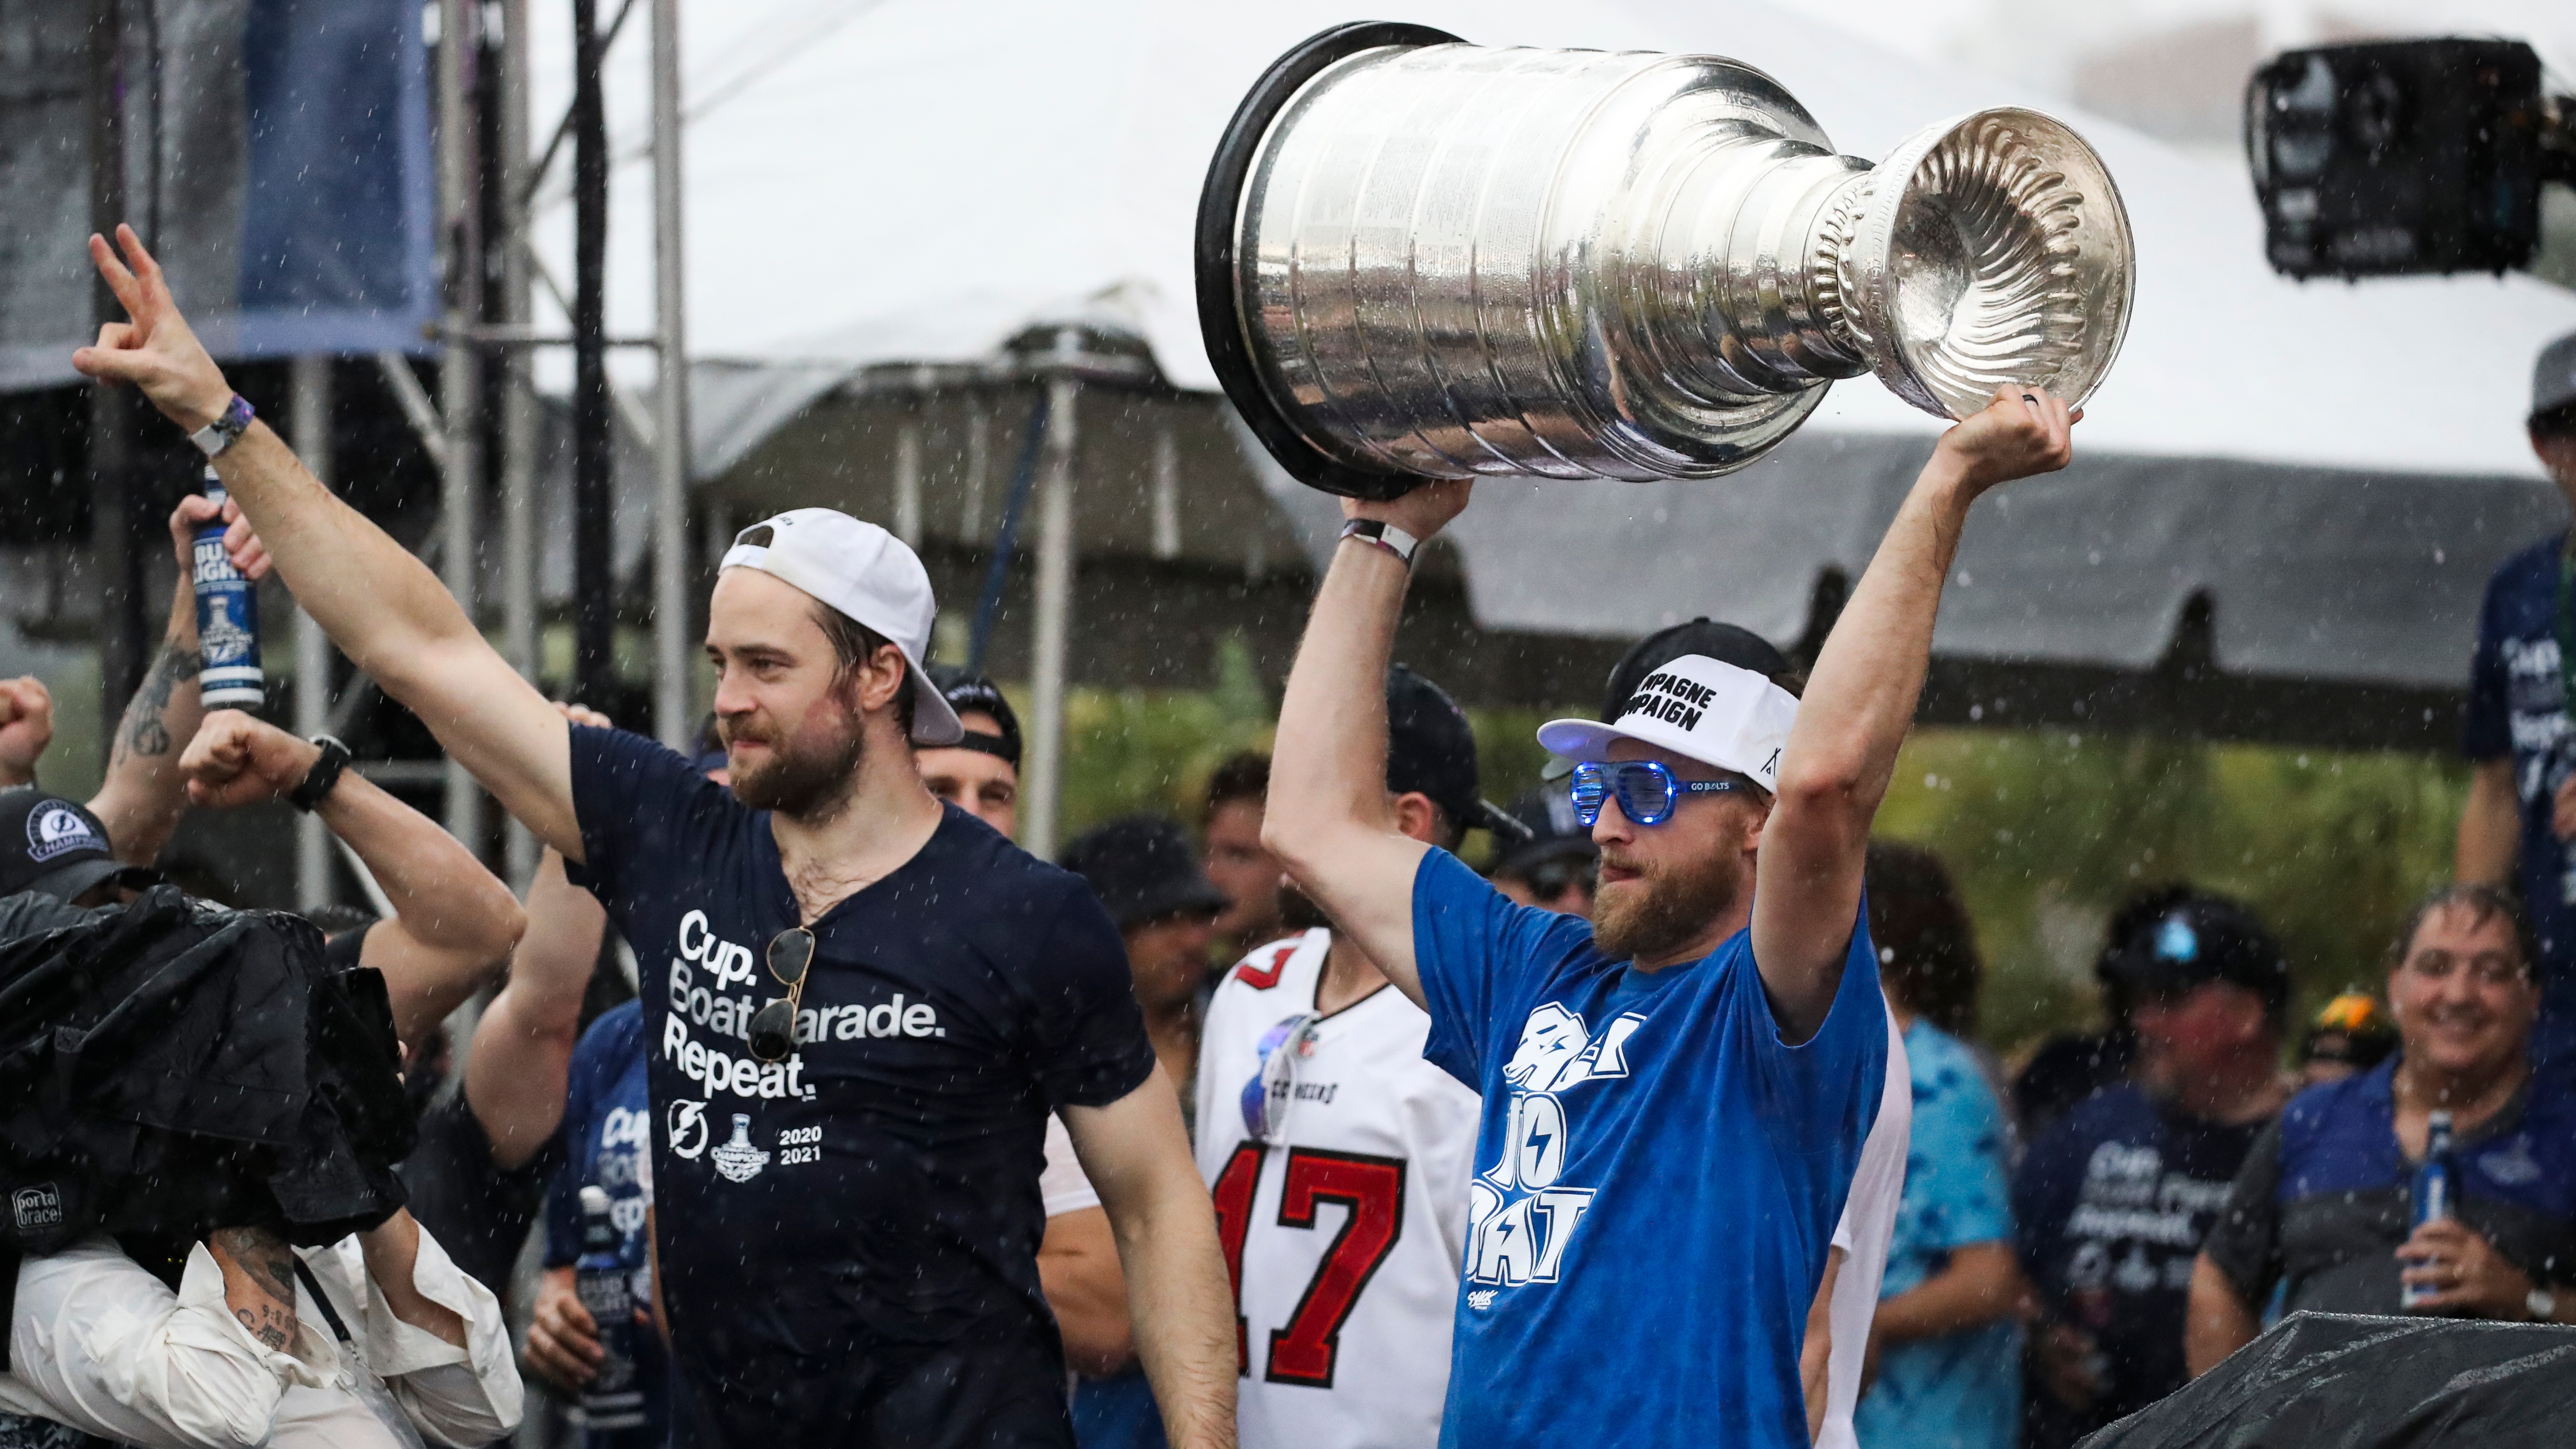 Recent photo of the Stanley Cup shows repairs made to it after it was  damaged this summer - Article - Bardown